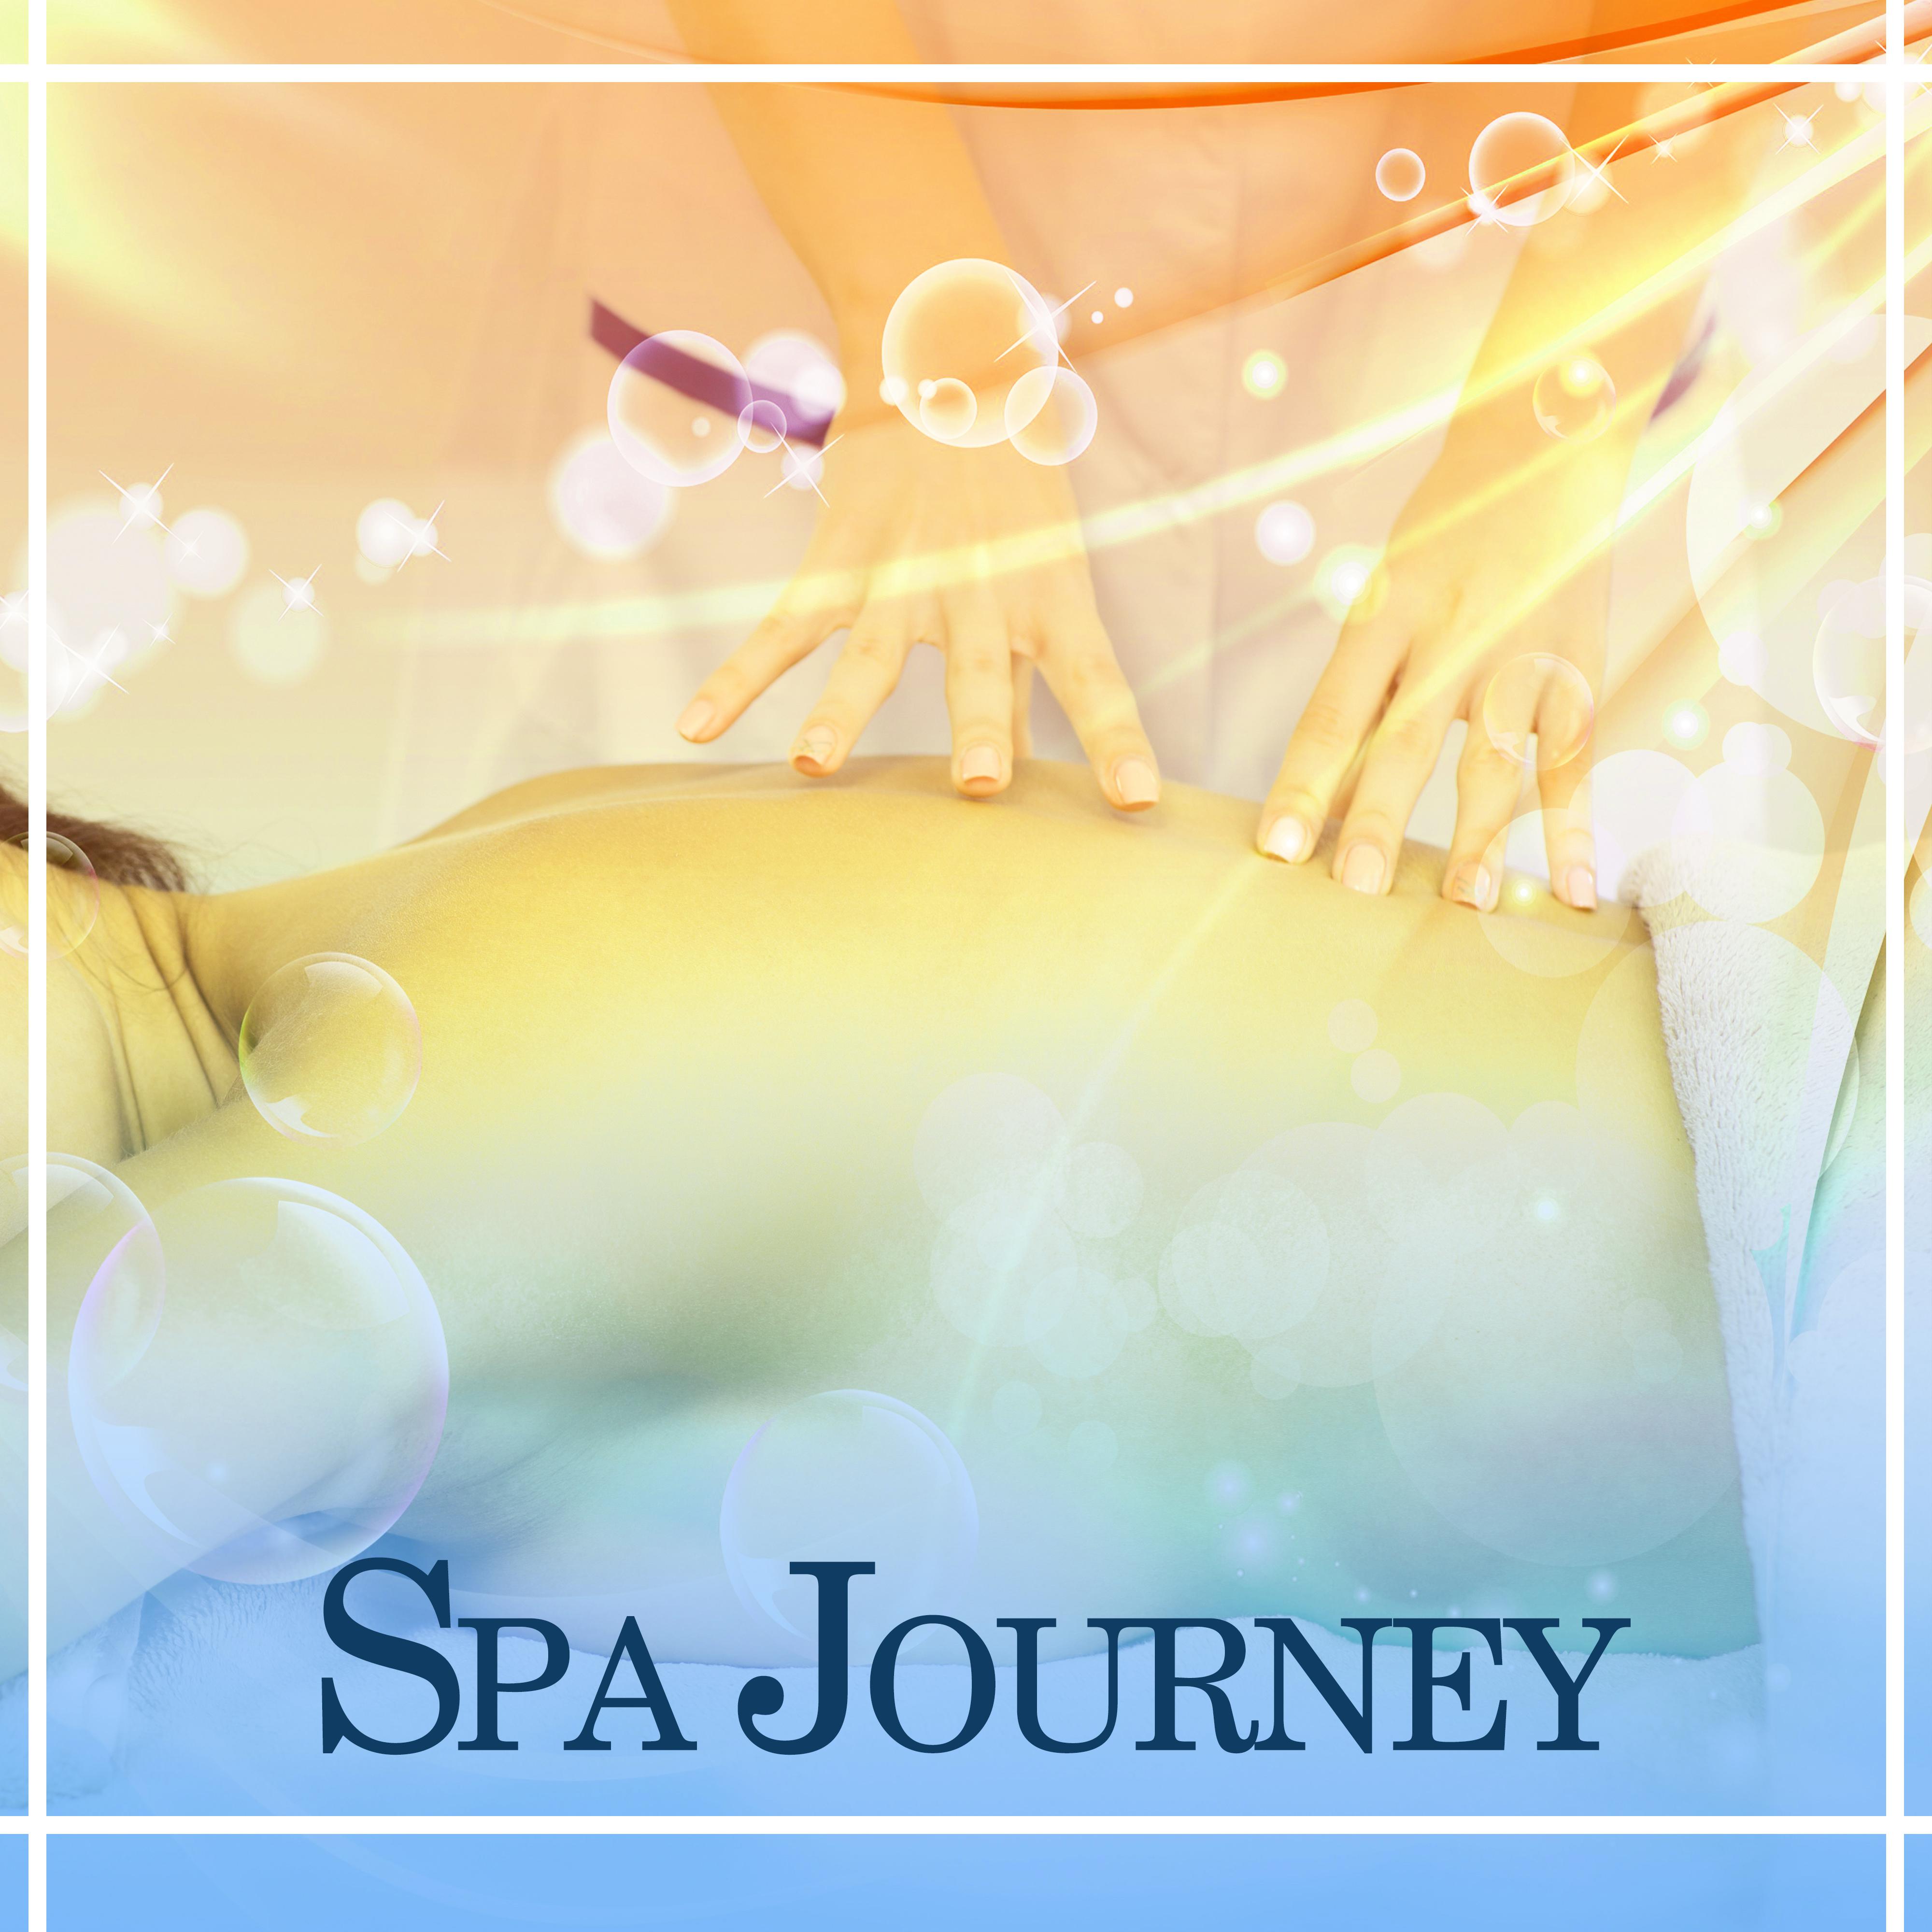 Spa Journey – Deep Relaxation with New Age, Music for Massage, Spa, Wellness, Relax, Beauty Parlour, Reiki, Zen